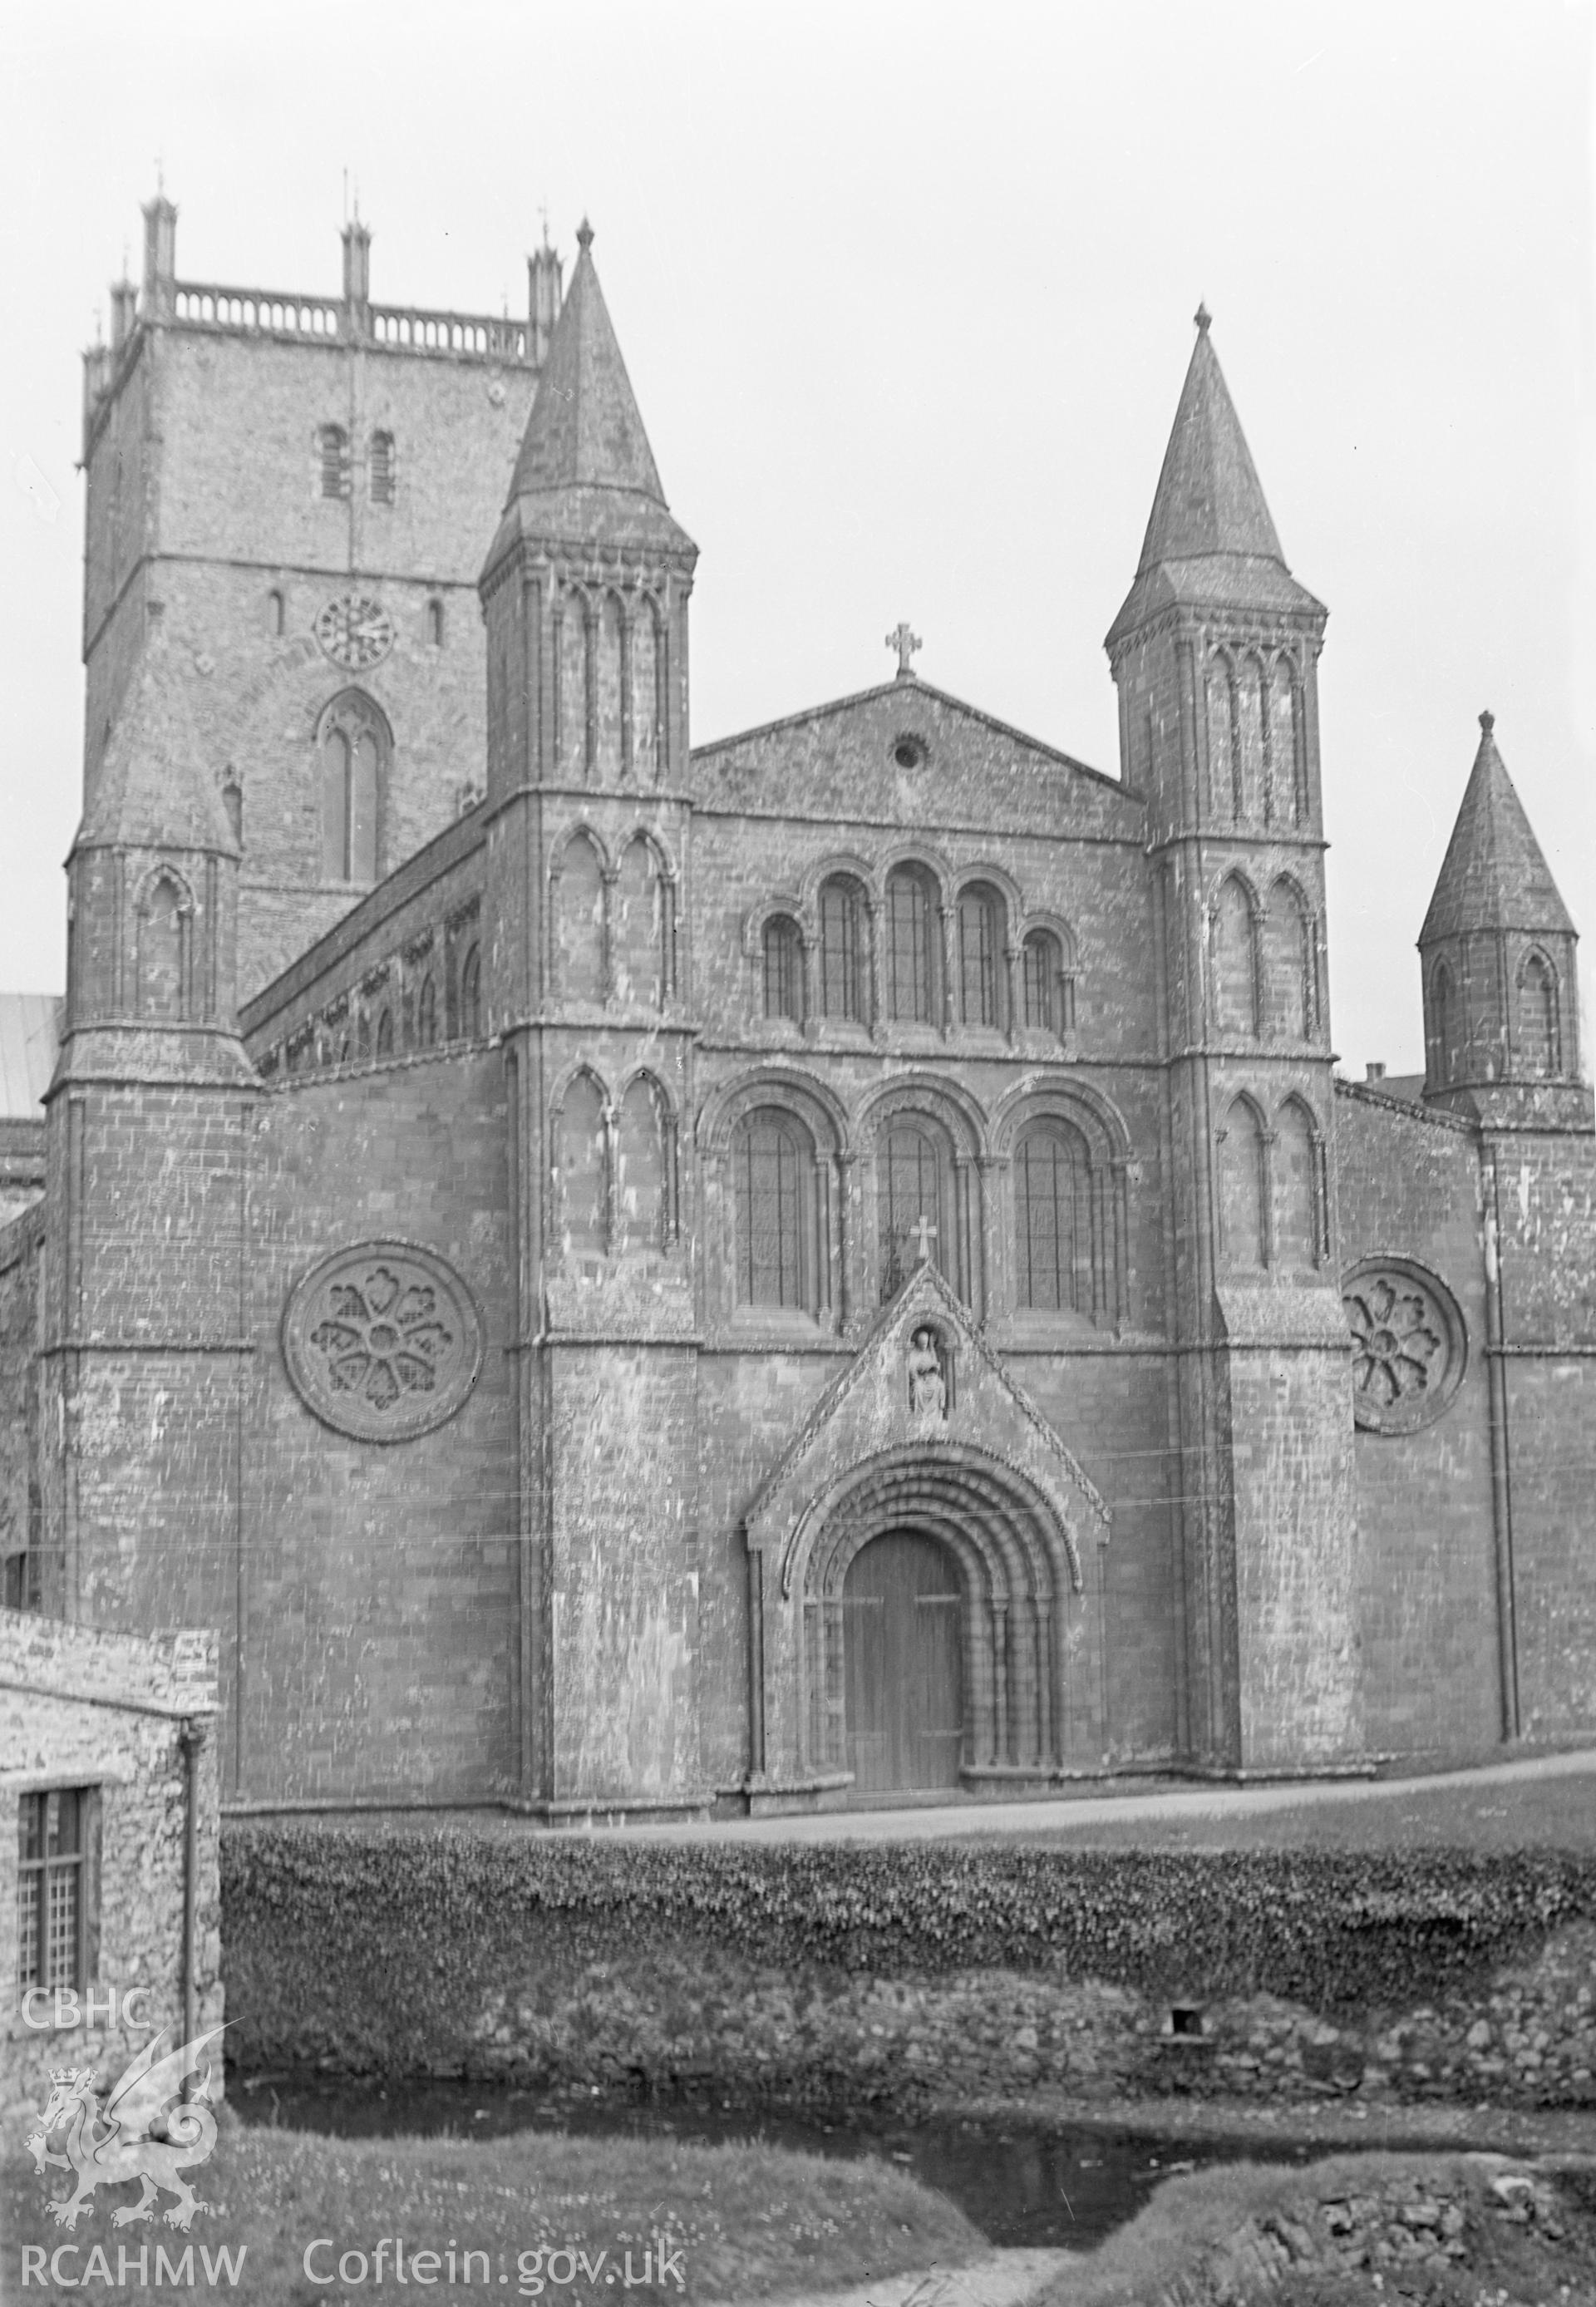 Black and white nitrate negative showing exterior view of St David's Cathedral.